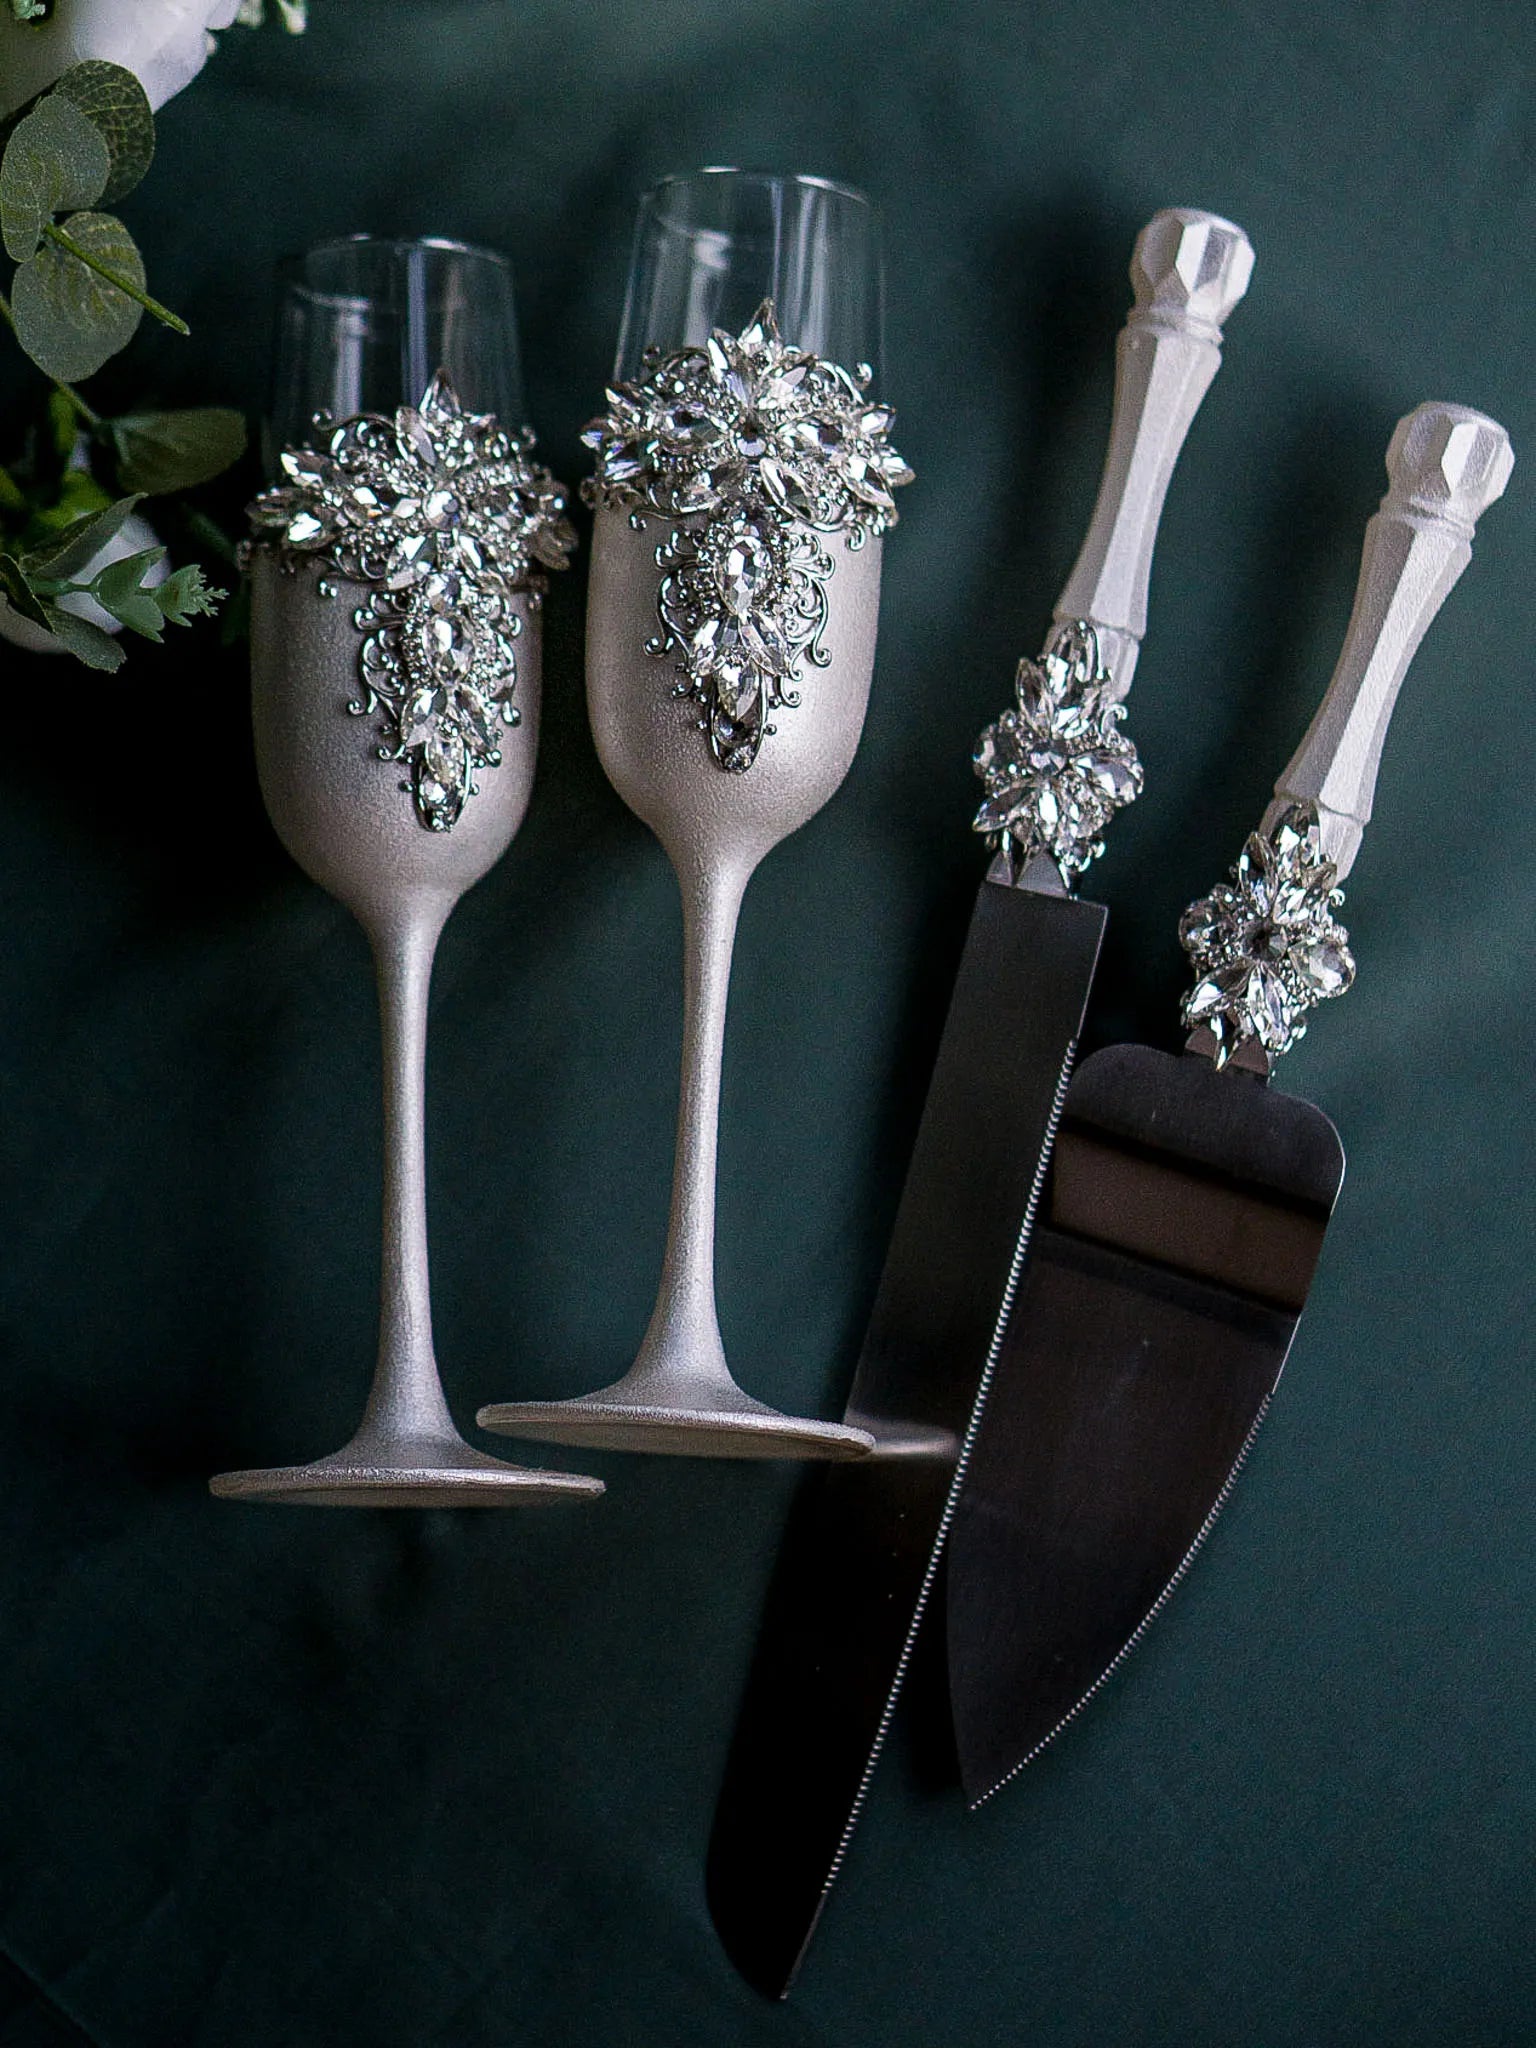 ilver Crystals Engraved Wedding Dessert Forks and Plate Set - Gloria - diamoreds